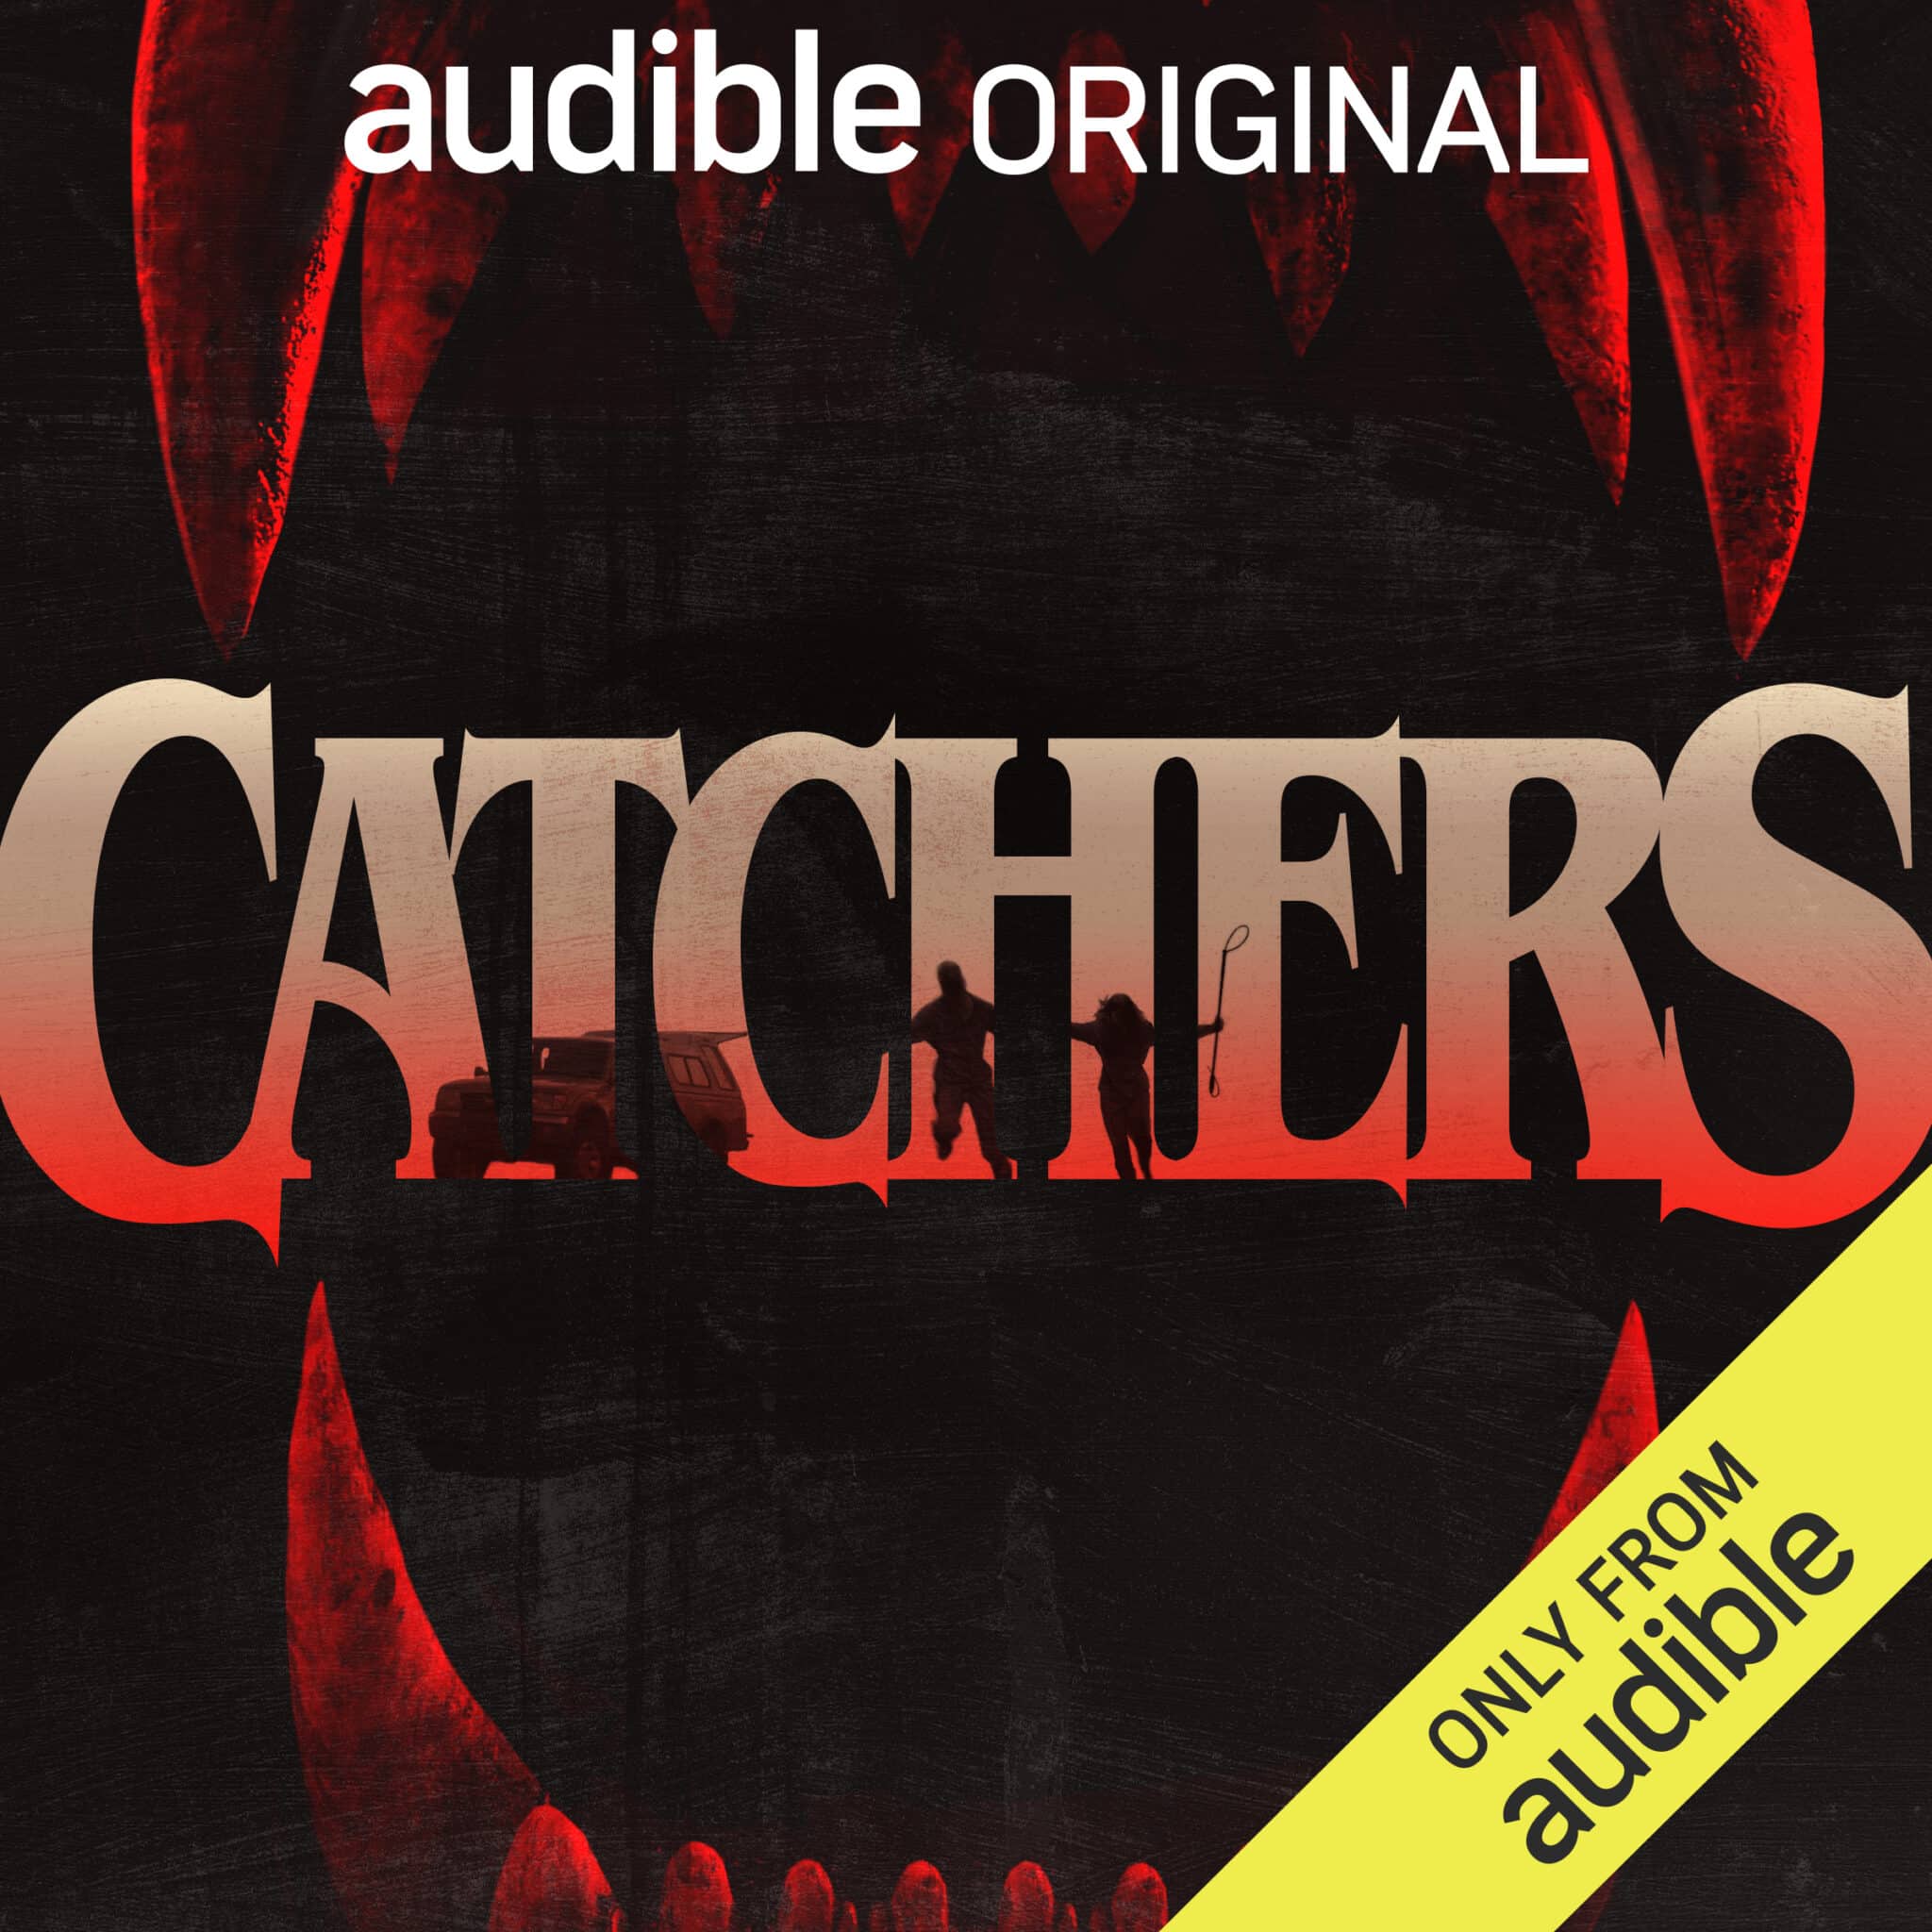 Catchers Cover Art on Audible